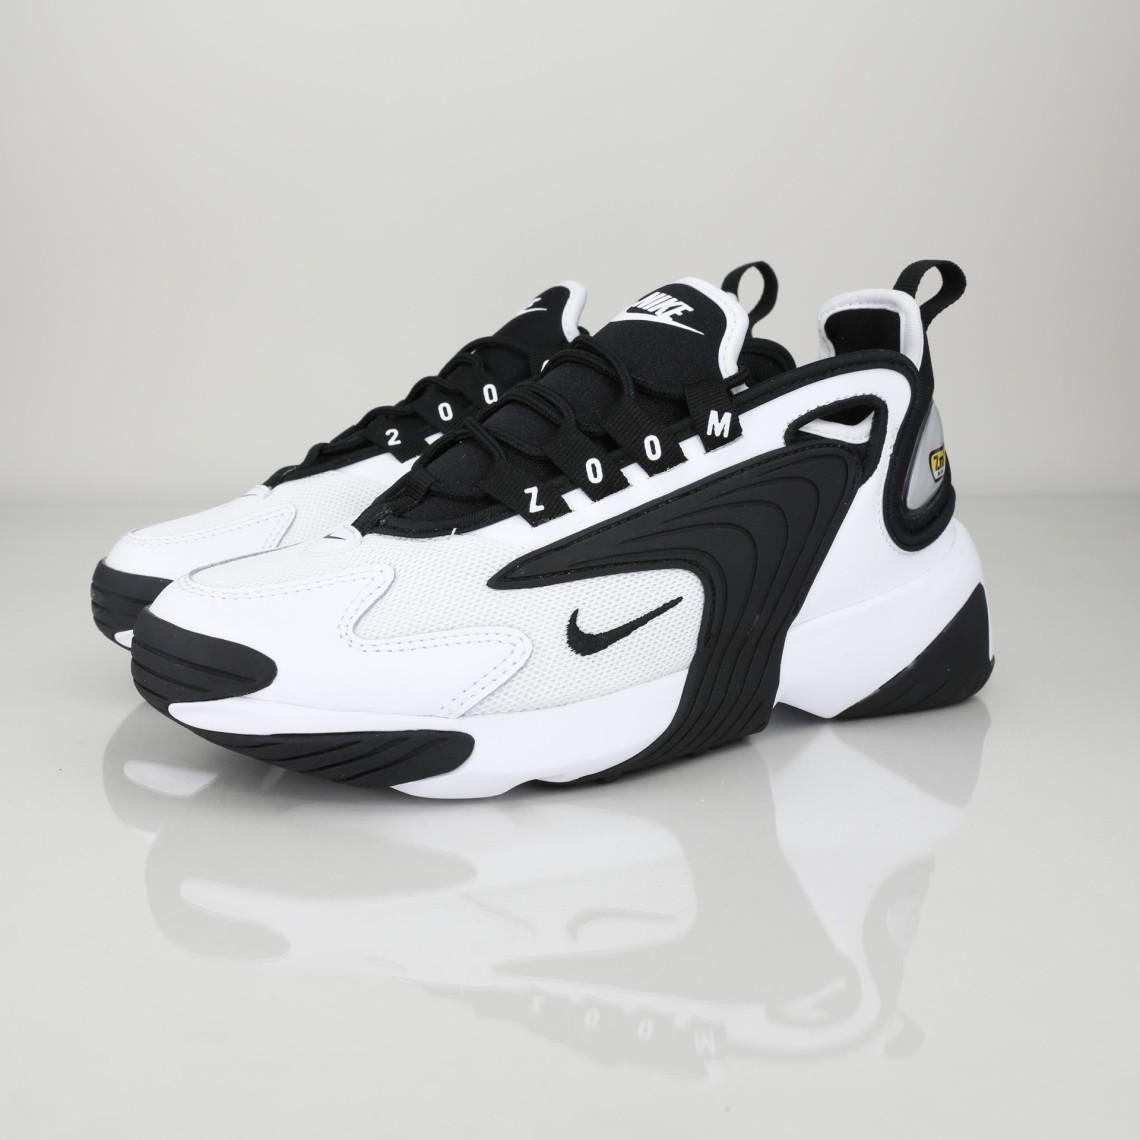 Zoom Tn Nike Online Hotsell, UP TO 52% OFF